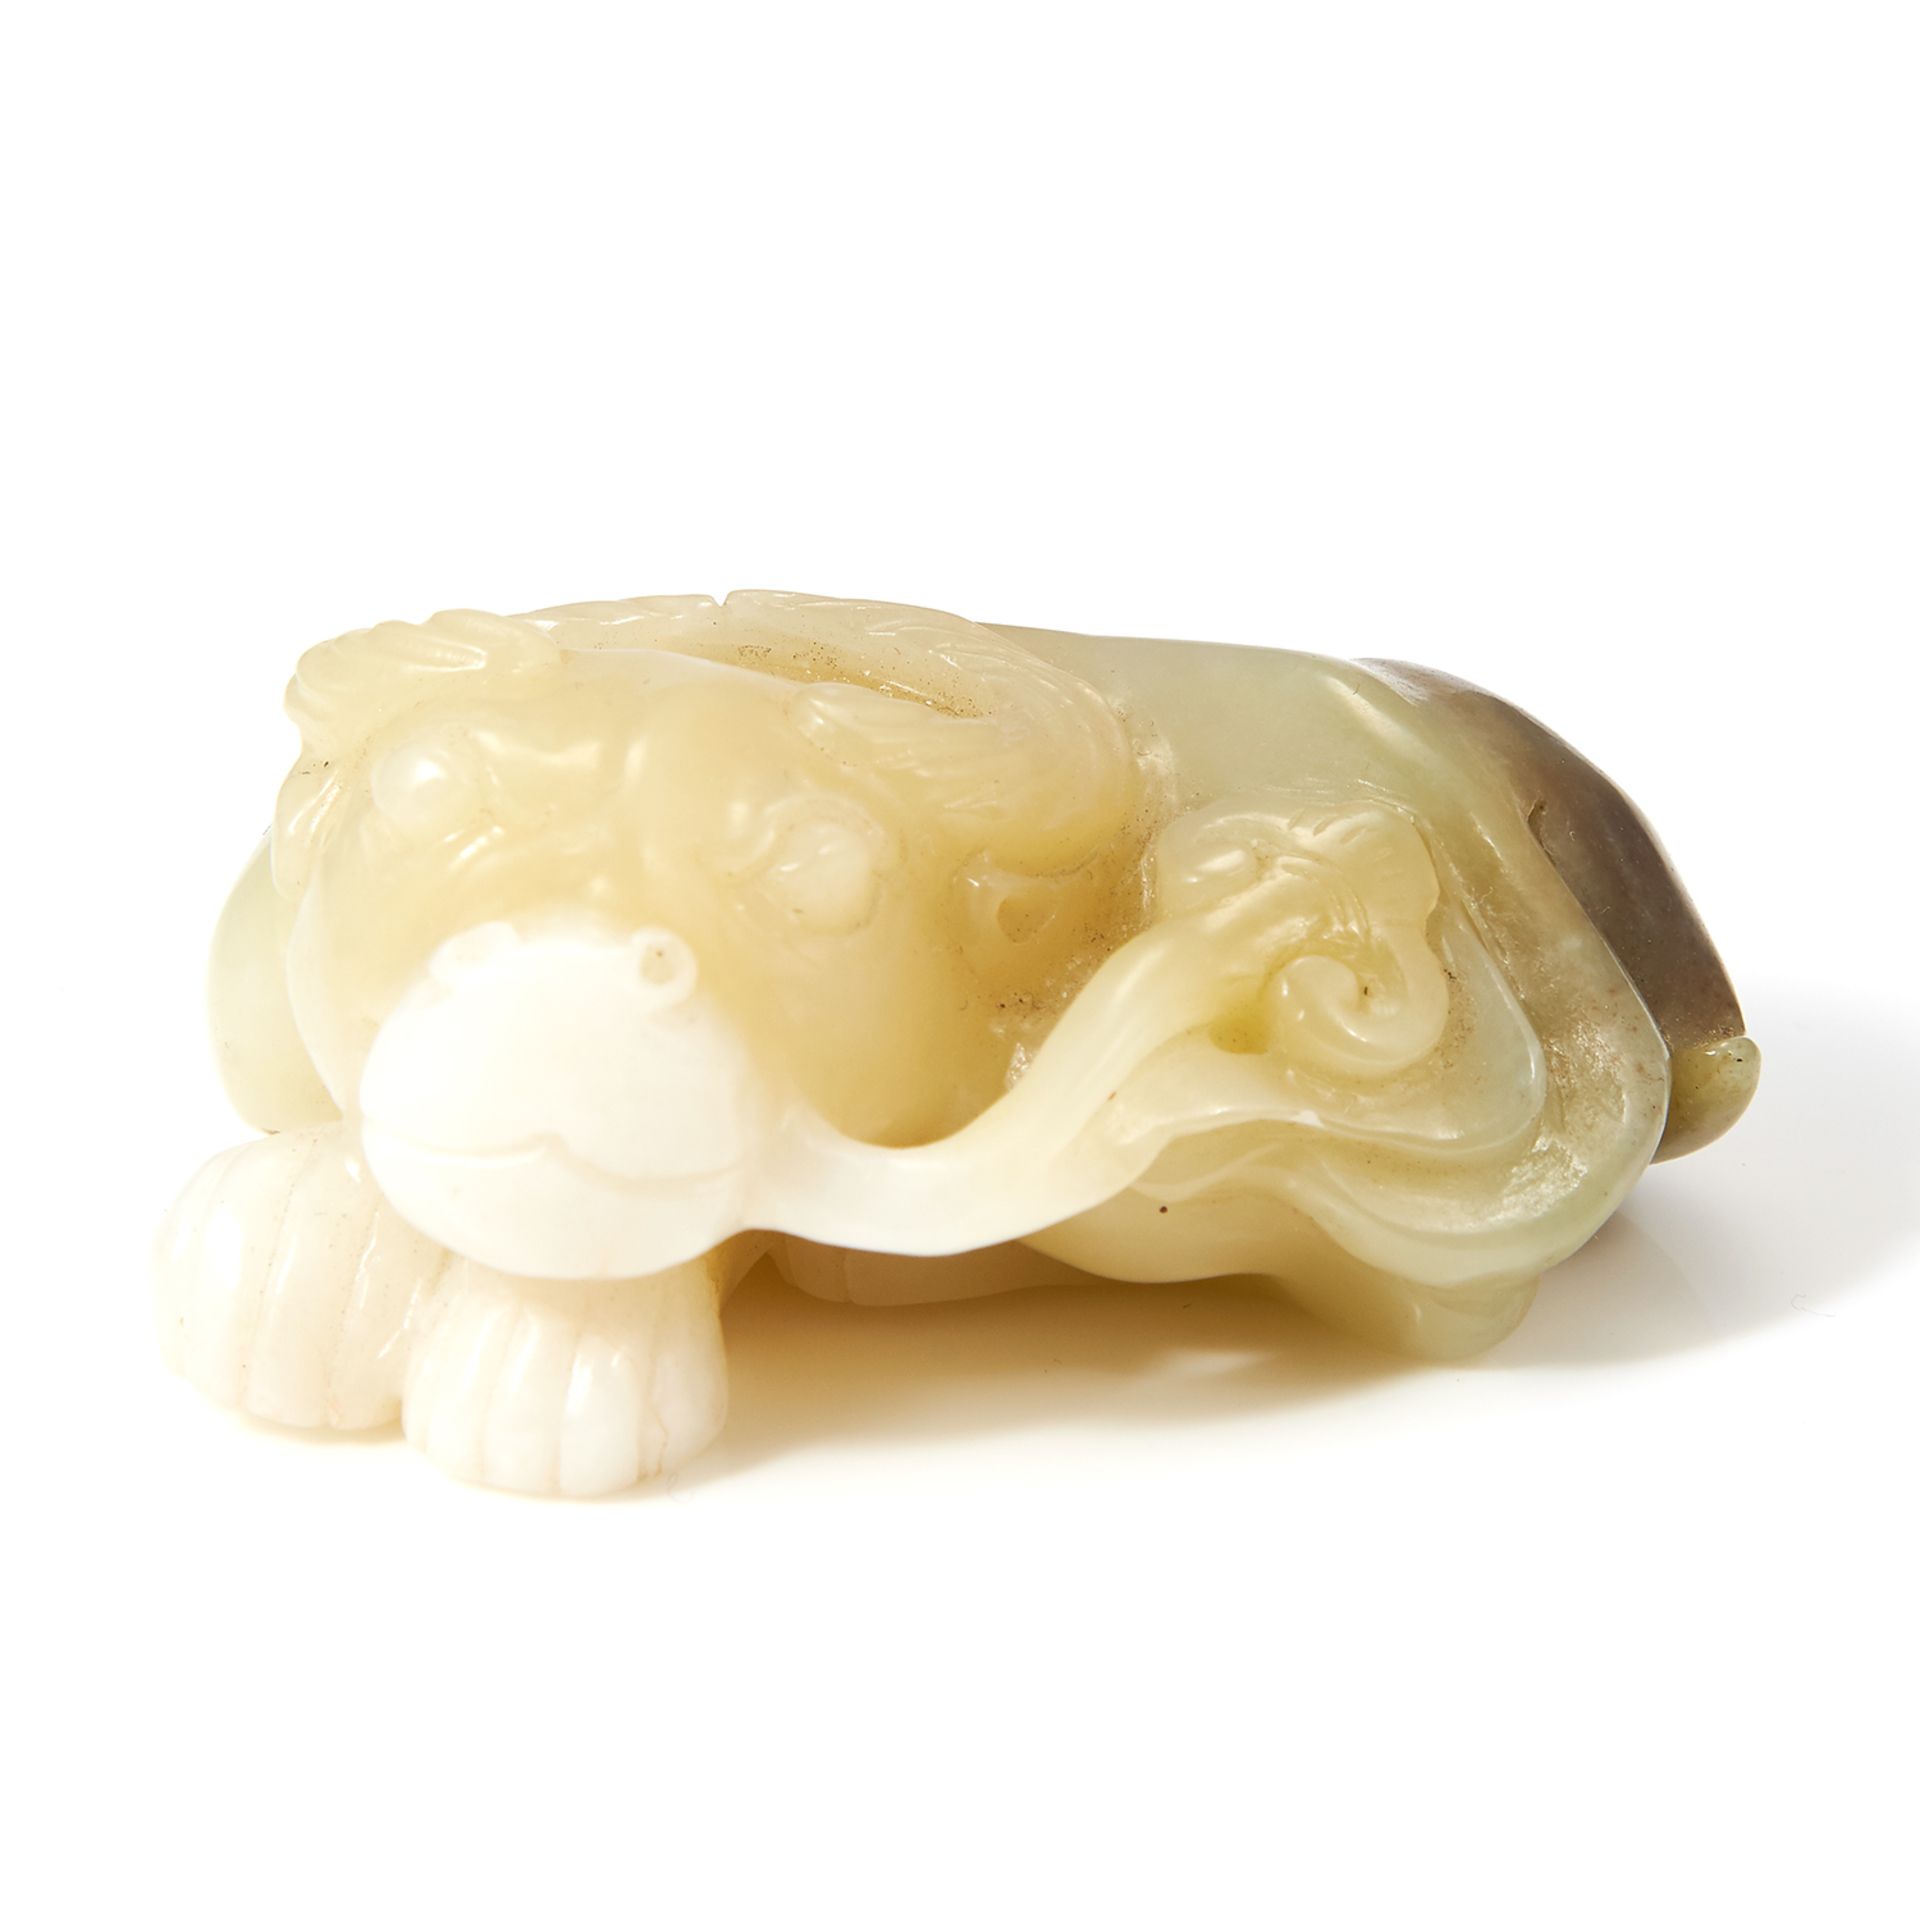 A CHINESE CARVED JADE RAM STATUE carved in detail to depict a ram, curled up and laying down, 5.8cm,